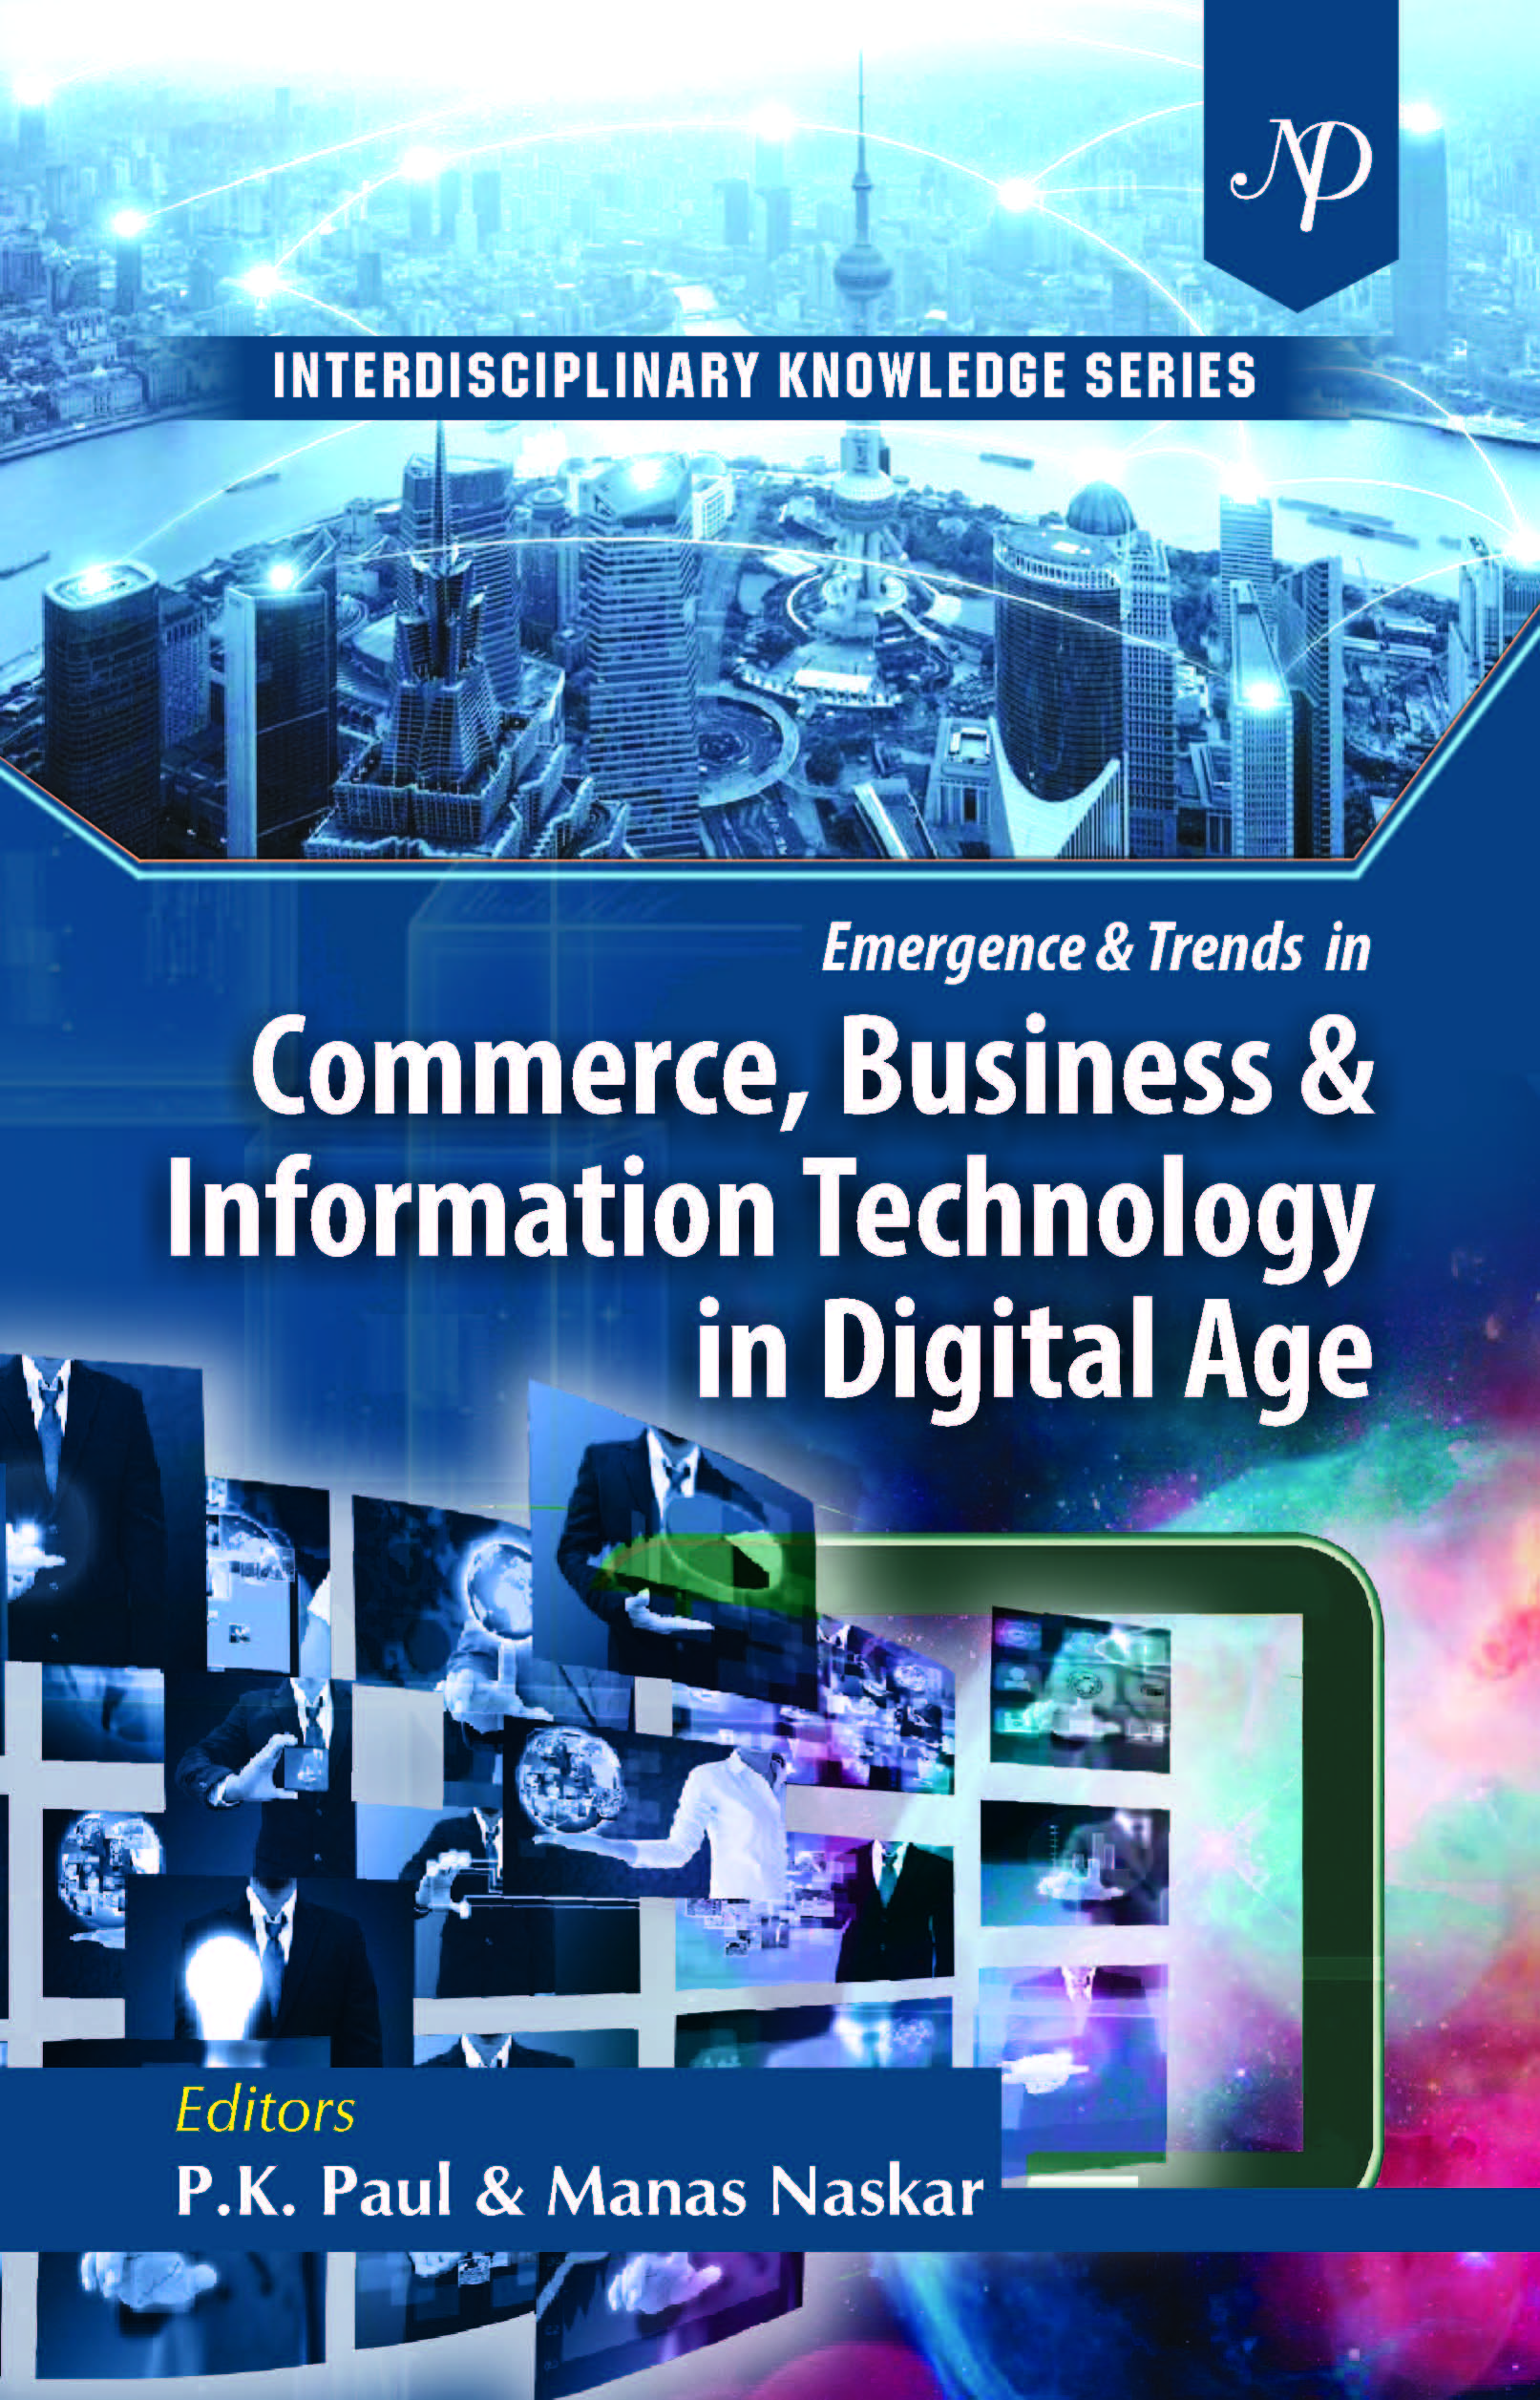 Emergence and Trends in Commerce business and Information Technology Cover-1.jpg